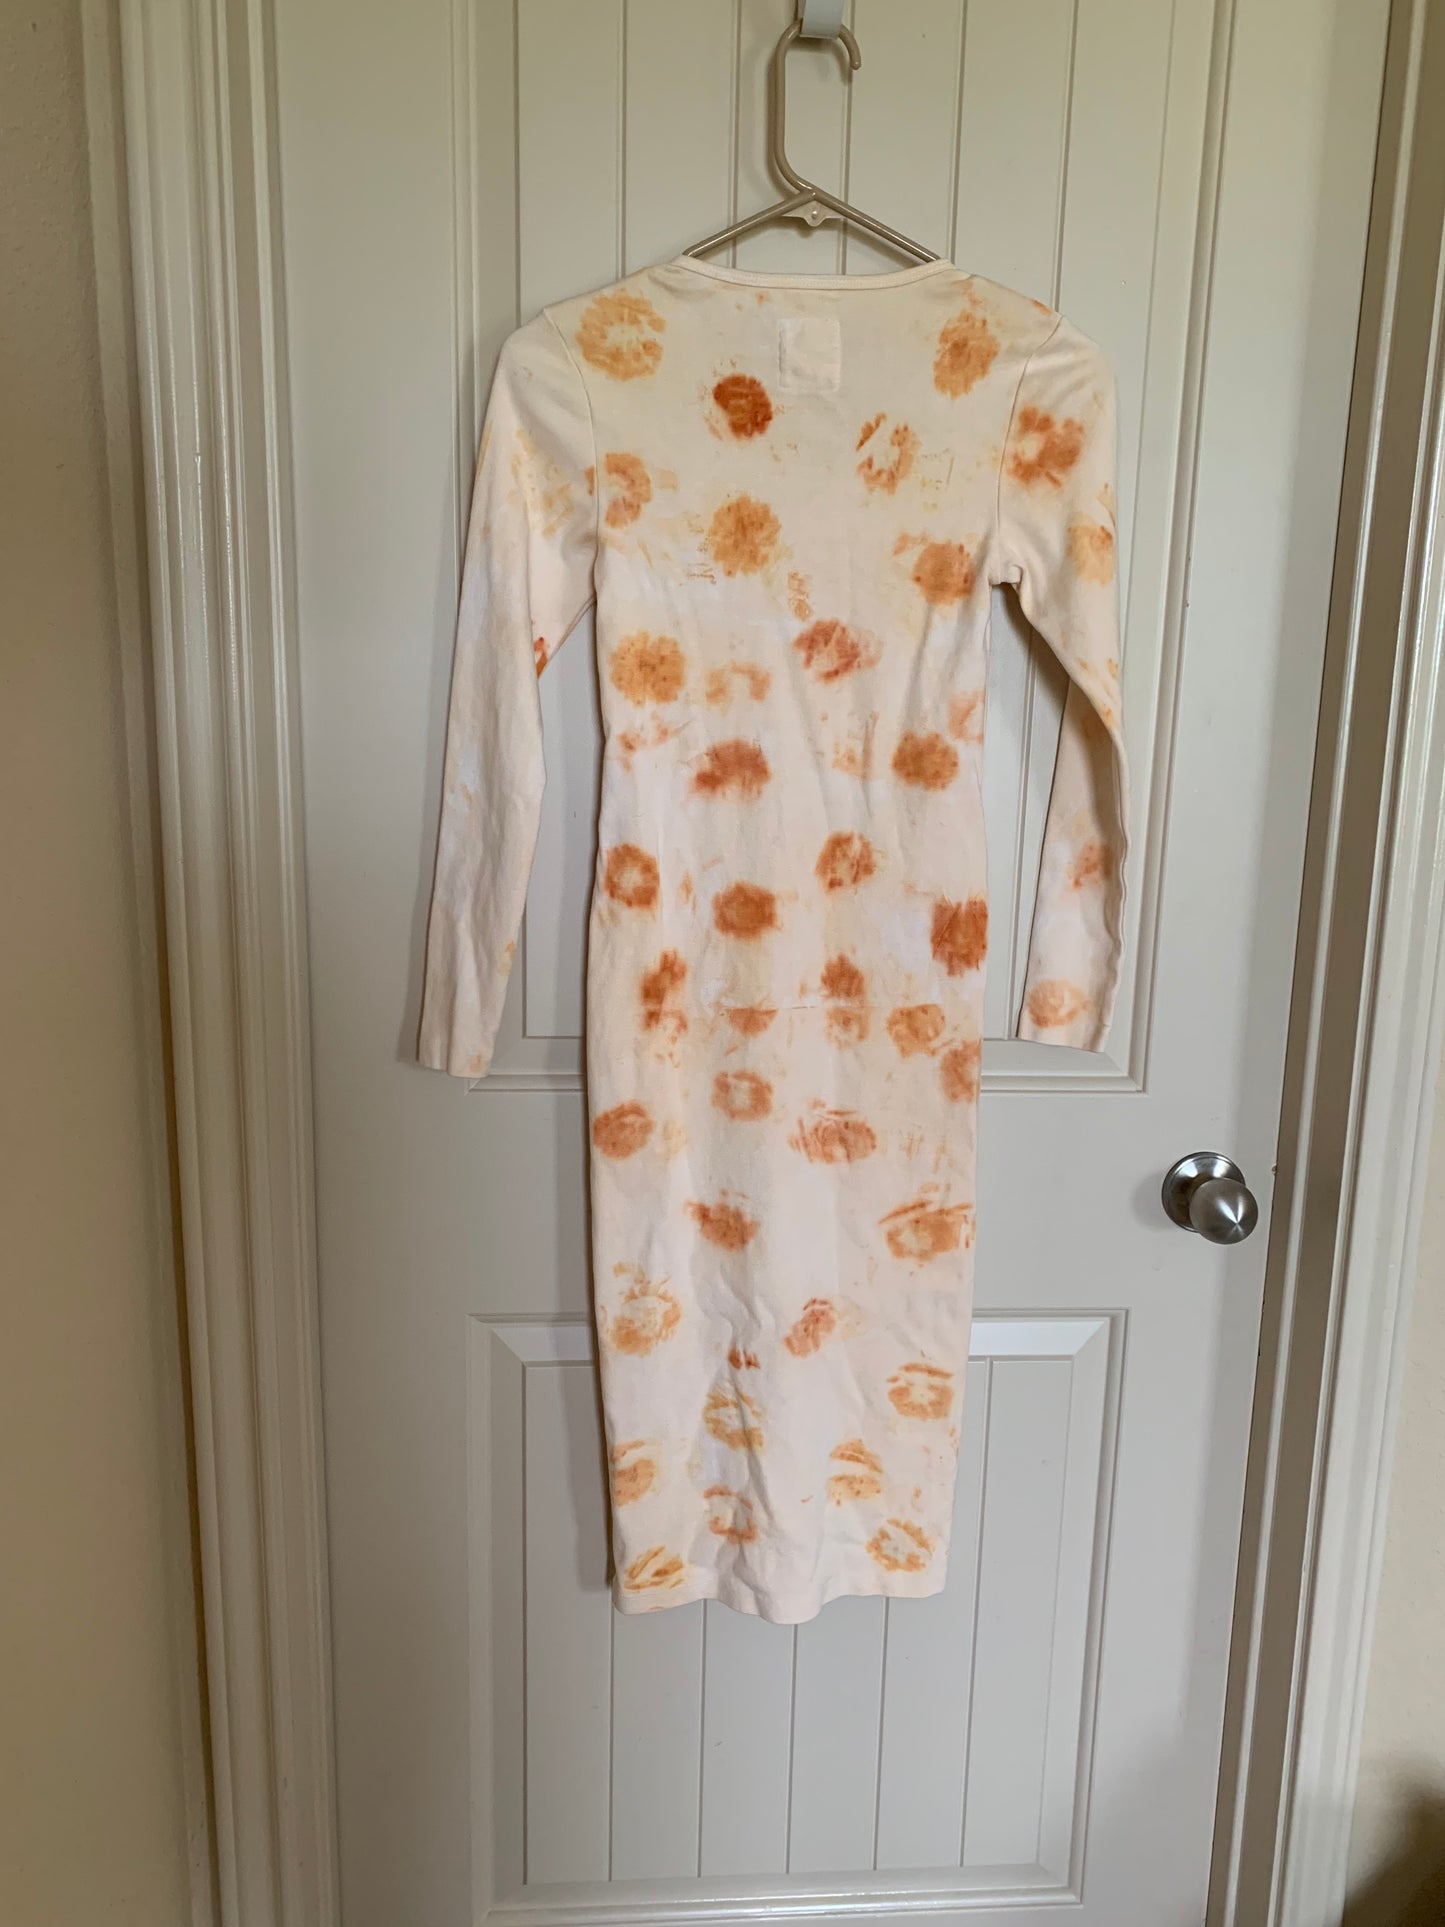 For Days Date night Flower pressed dress size XS